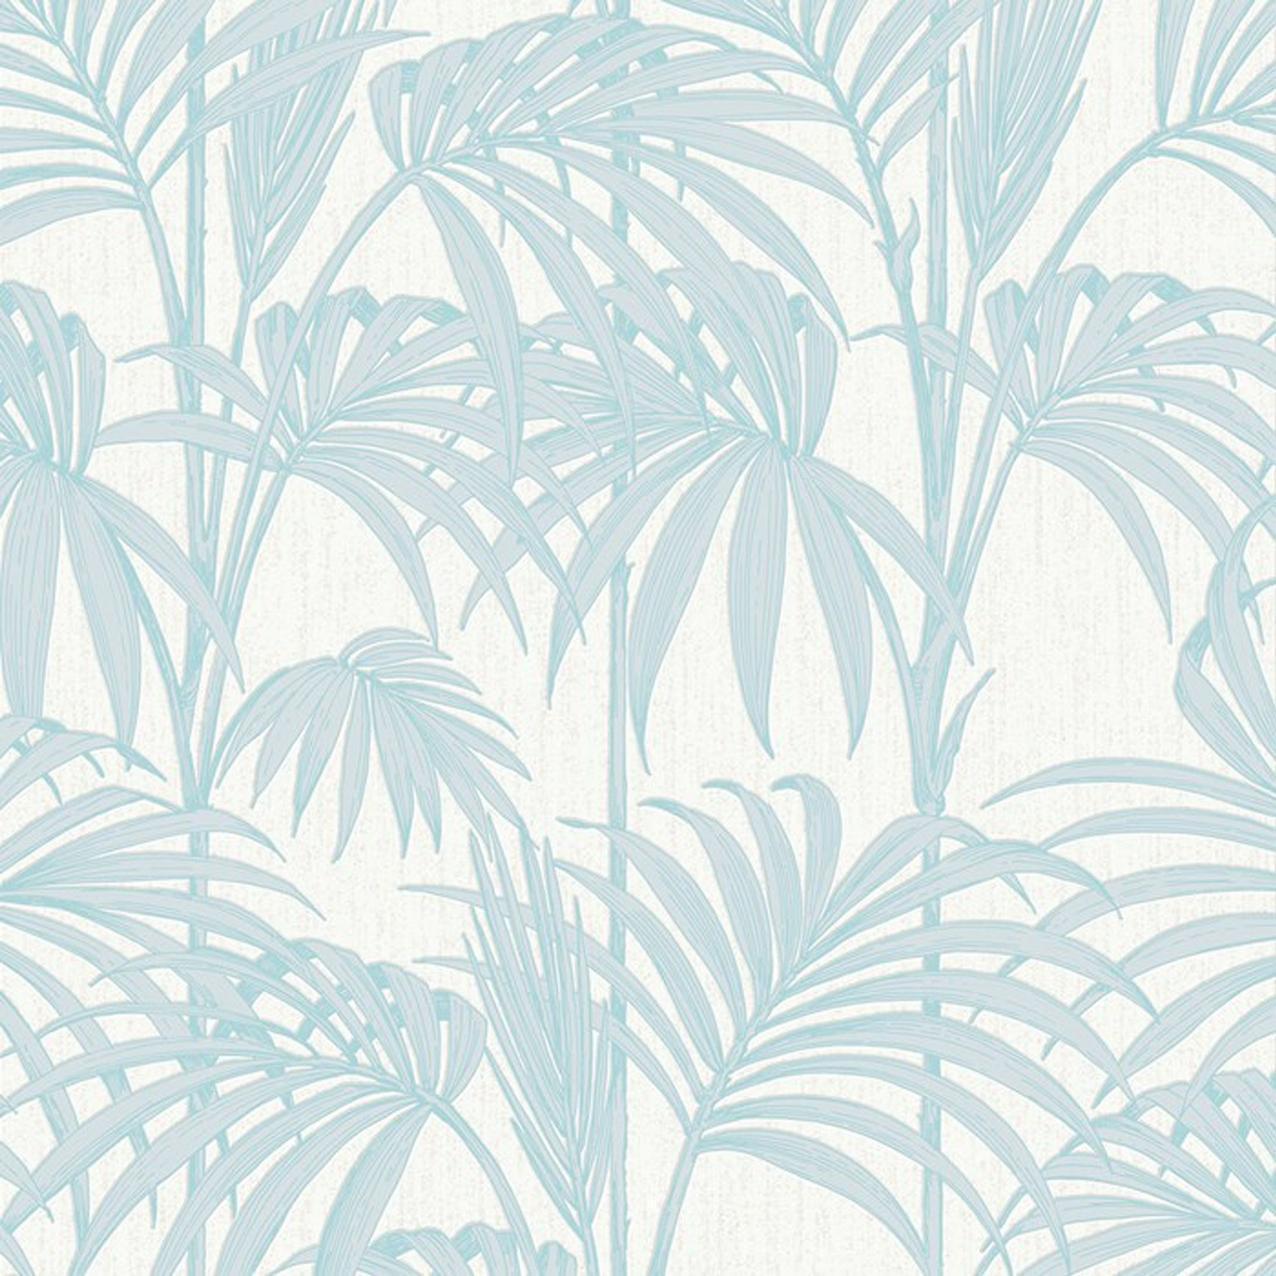 Wallpaper, once a design punchline, entices a new generation